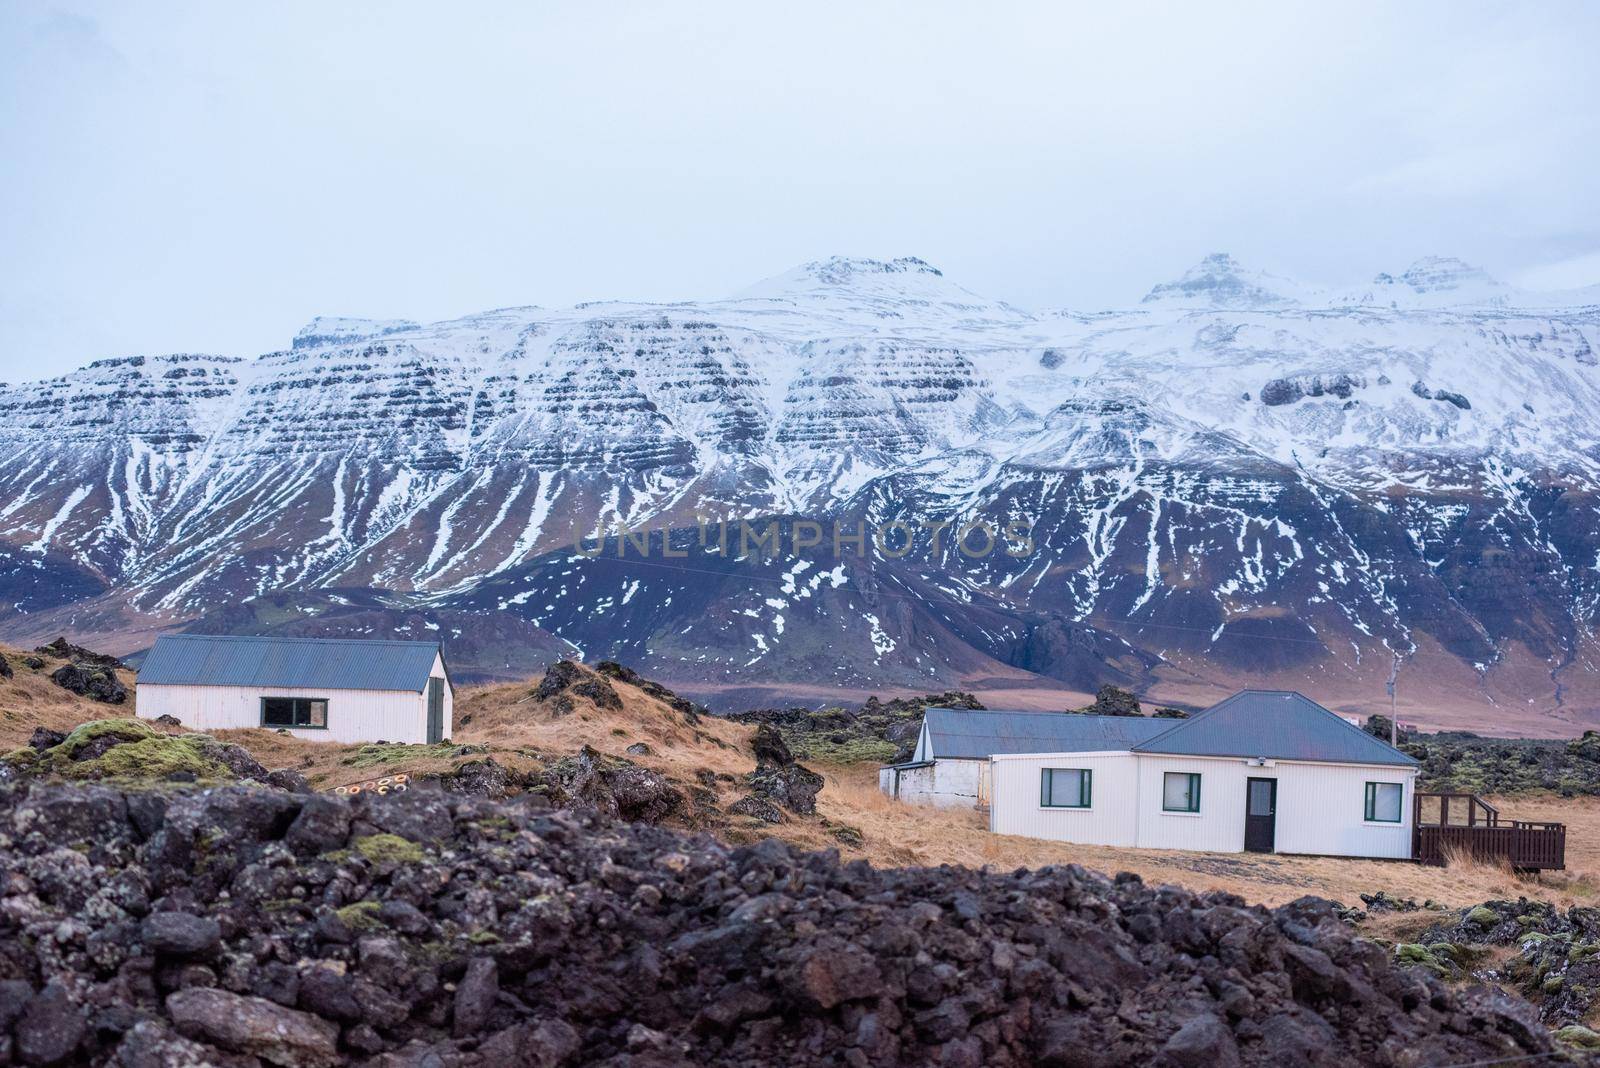 Vast rocky landscape with Icelandic homes sitting in front of gorgeous snow capped mountains with layers of snow and dark rock.